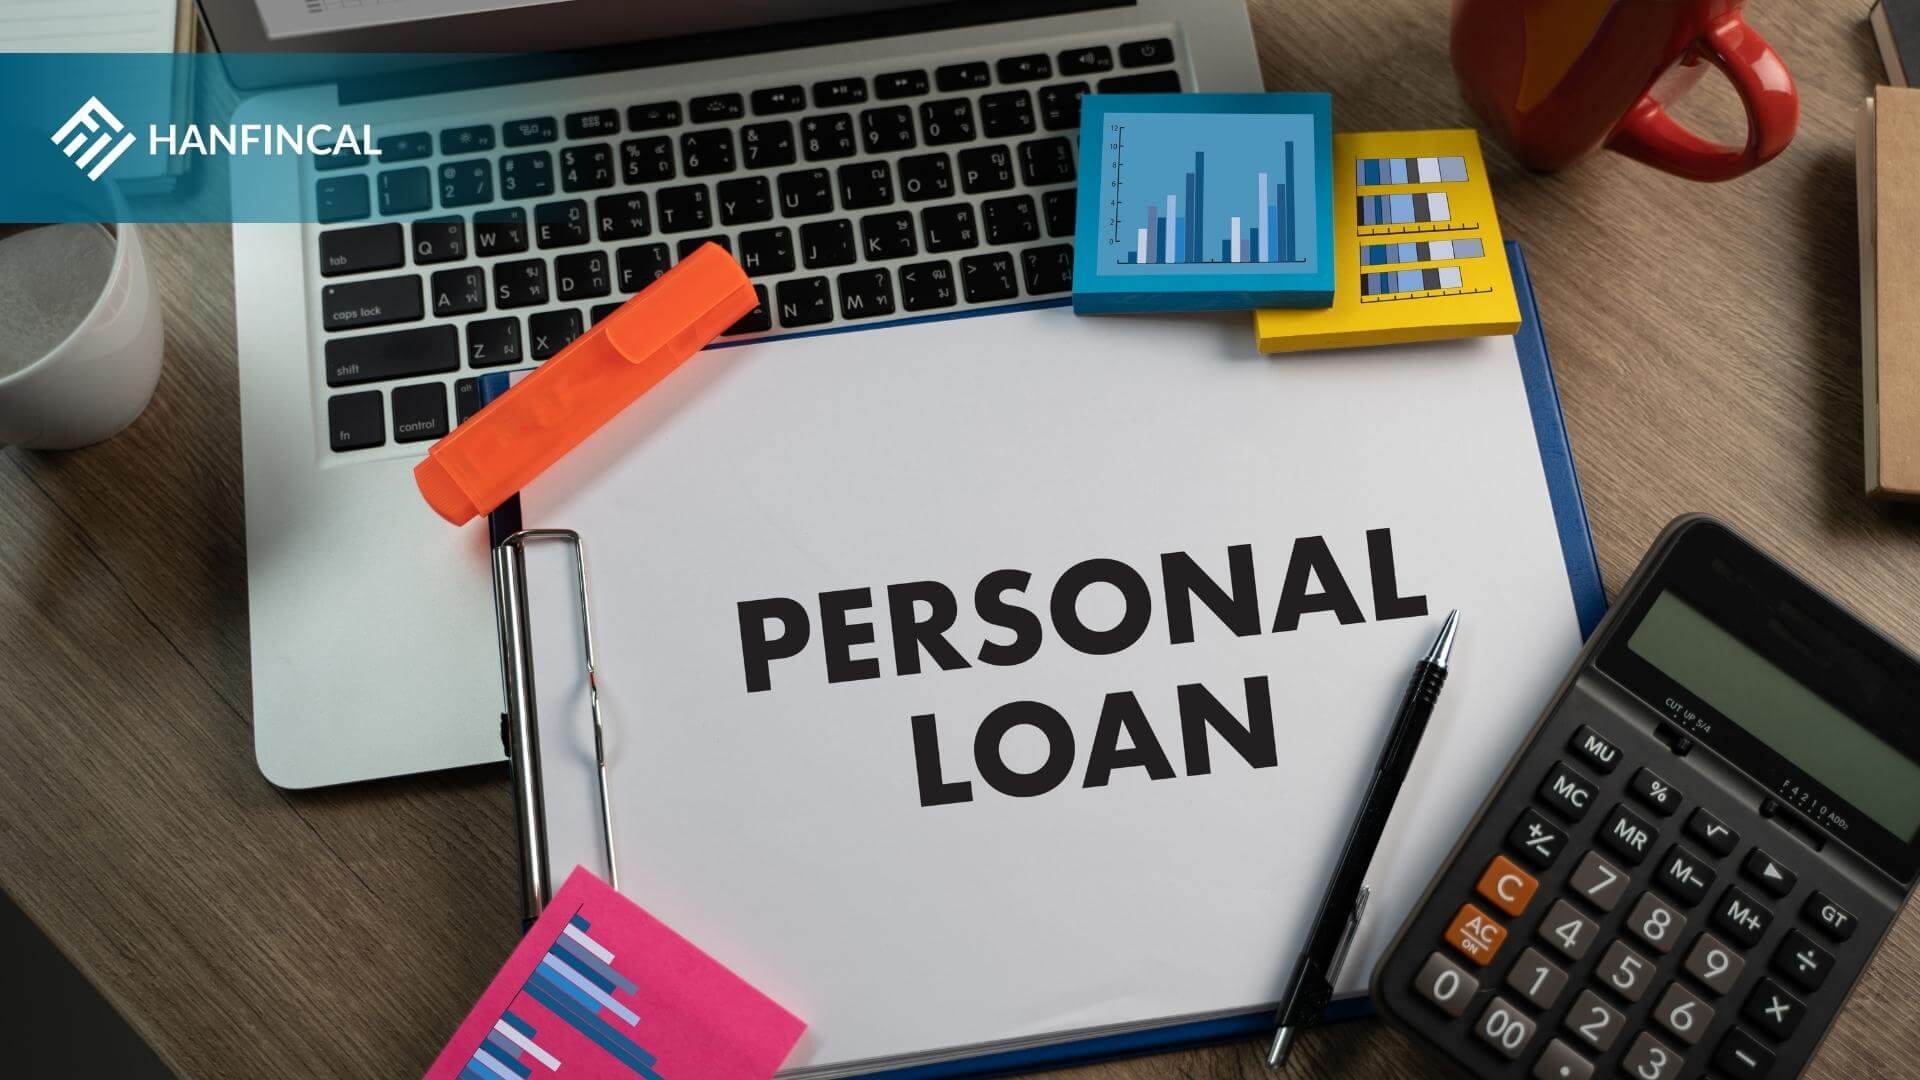 How long does it take to get a personal loan?